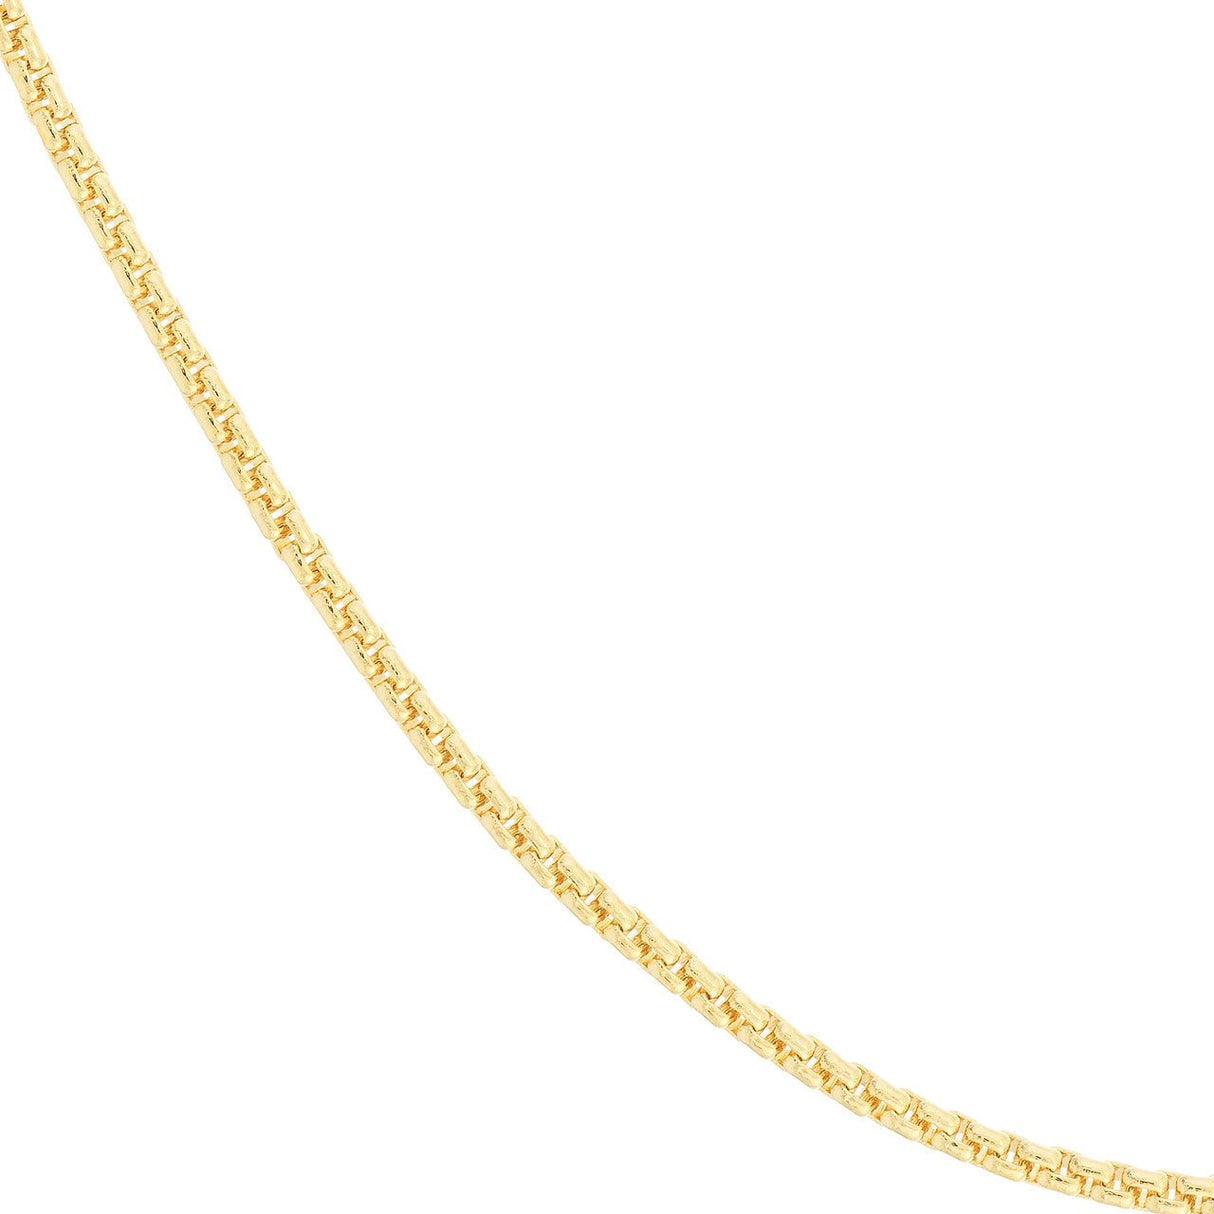 14K Gold Chain, 18", 1.75mm Solid Round Box Chain with Lobster Lock, Gold Layered Chains, Gold Chine Necklace, - Diamond Origin